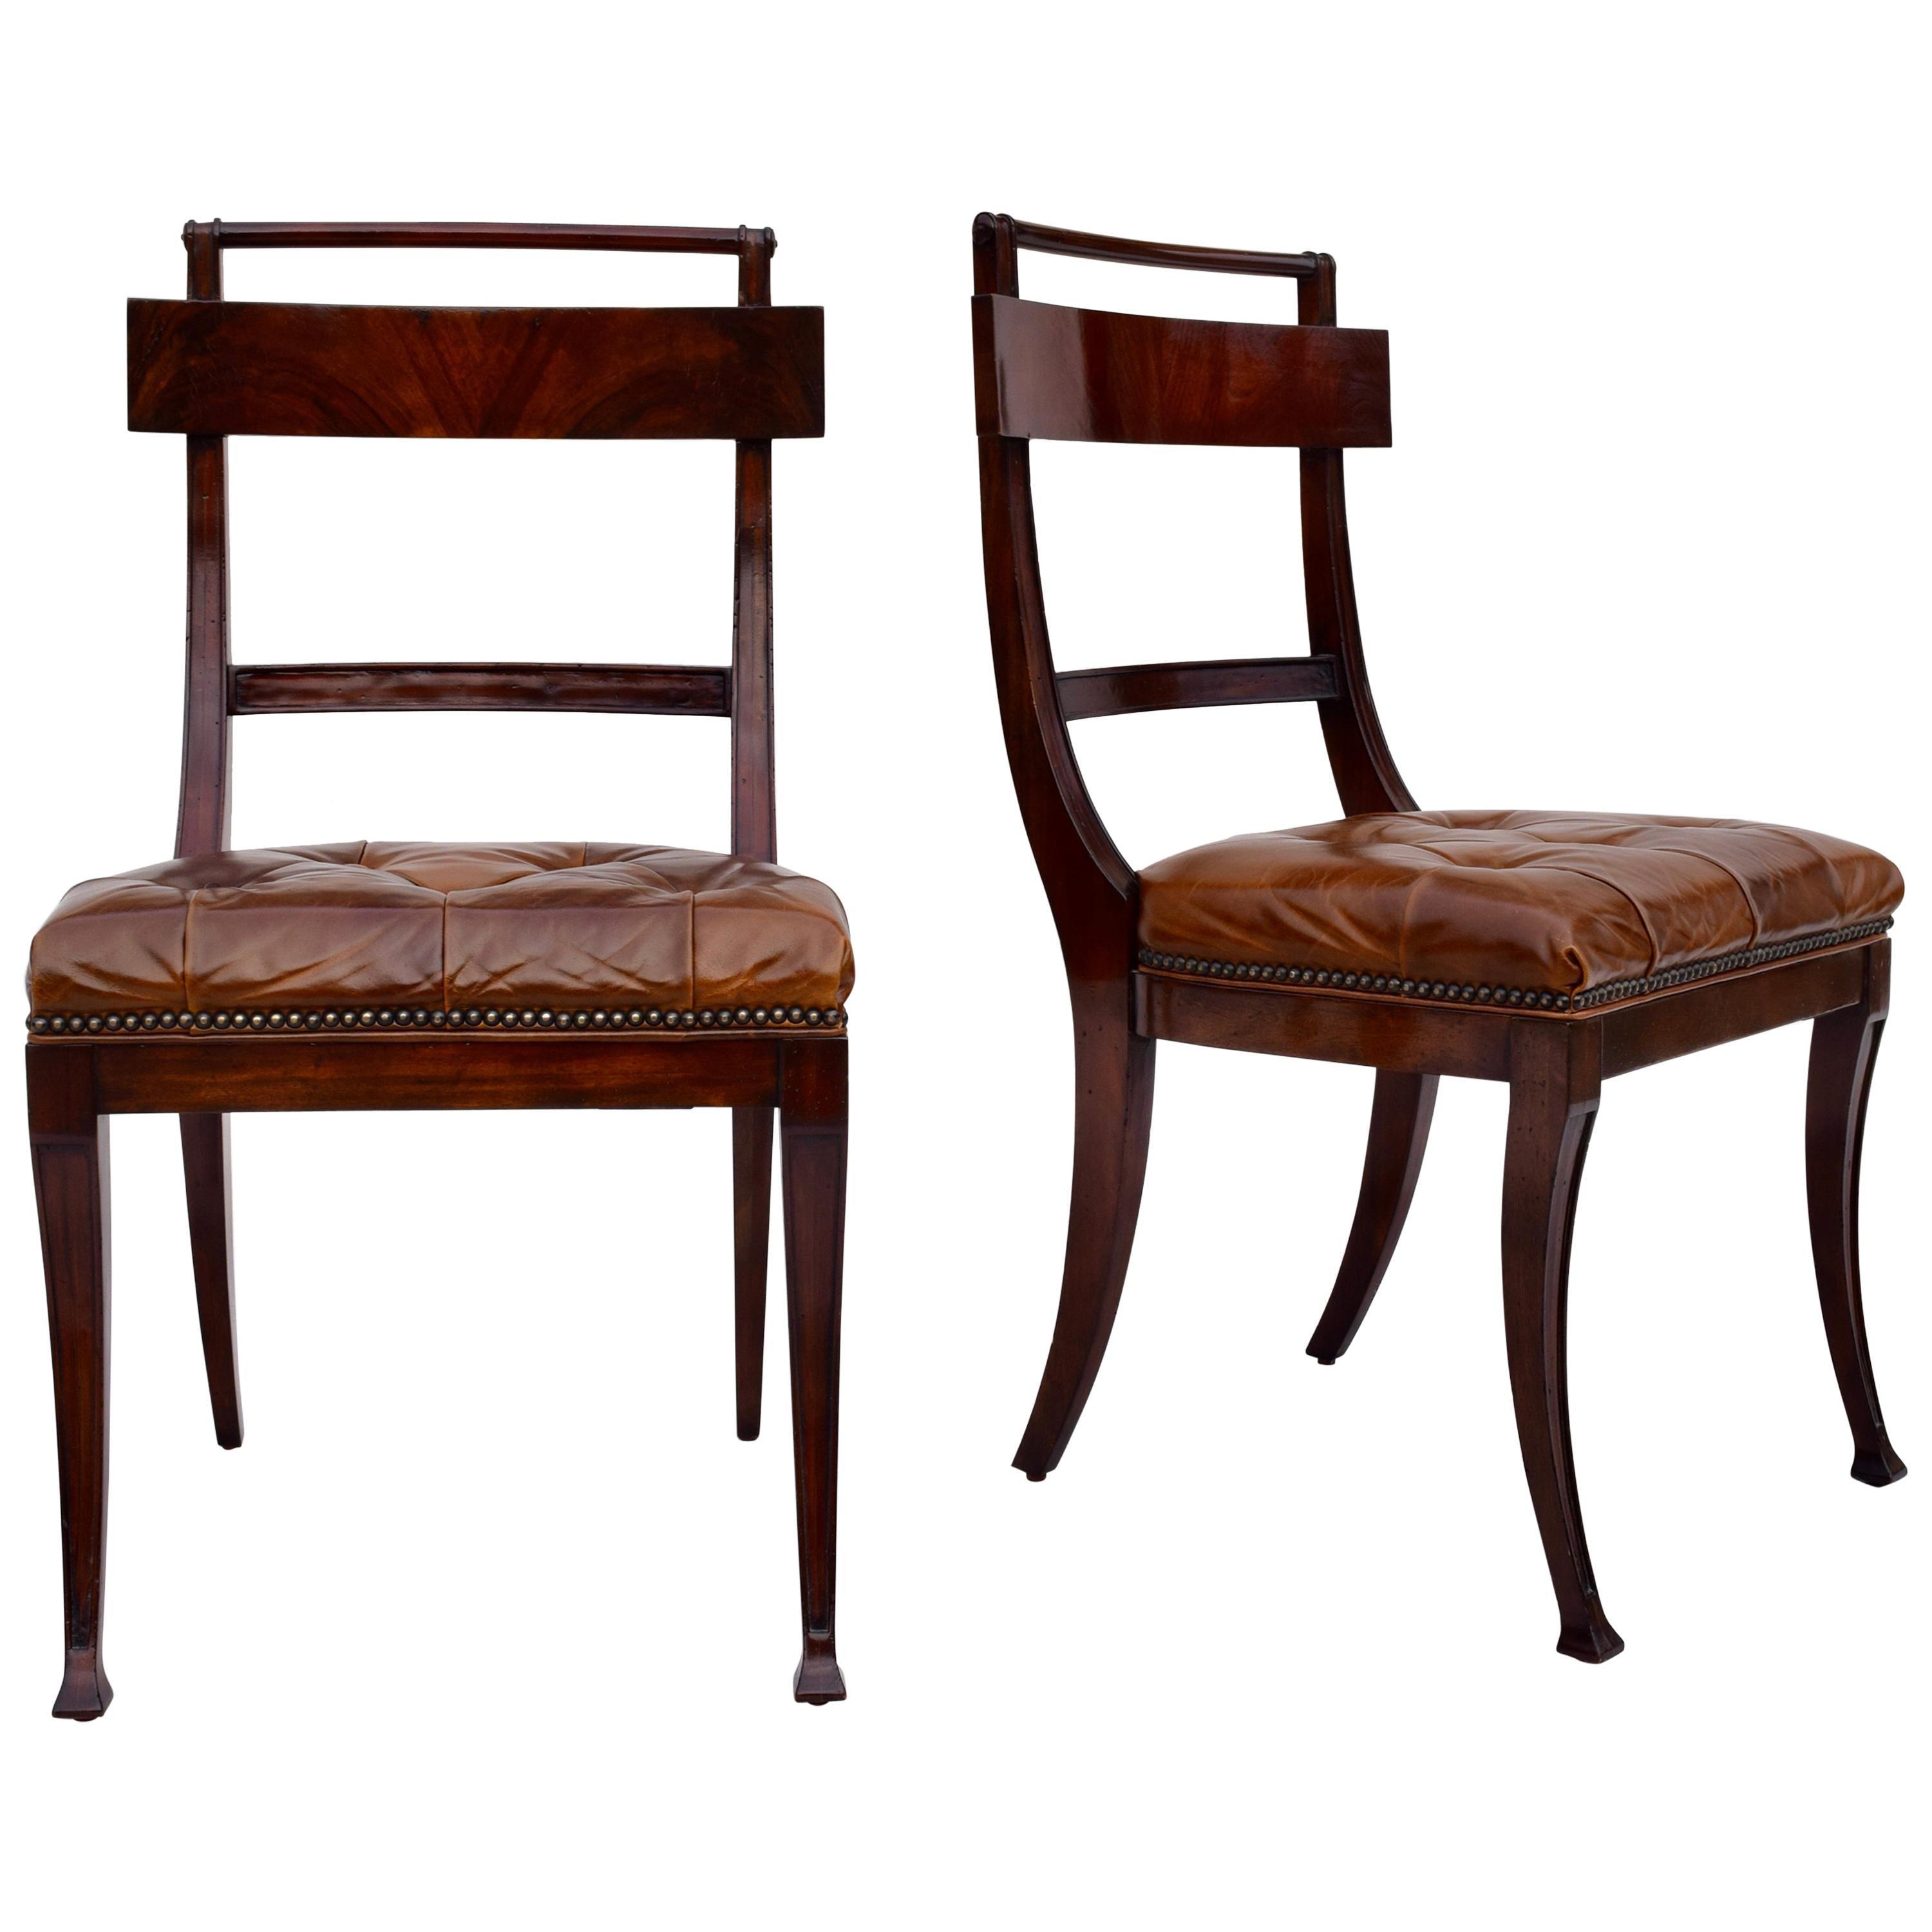 Henredon Hanover Dining Chairs, Acquisitions Line